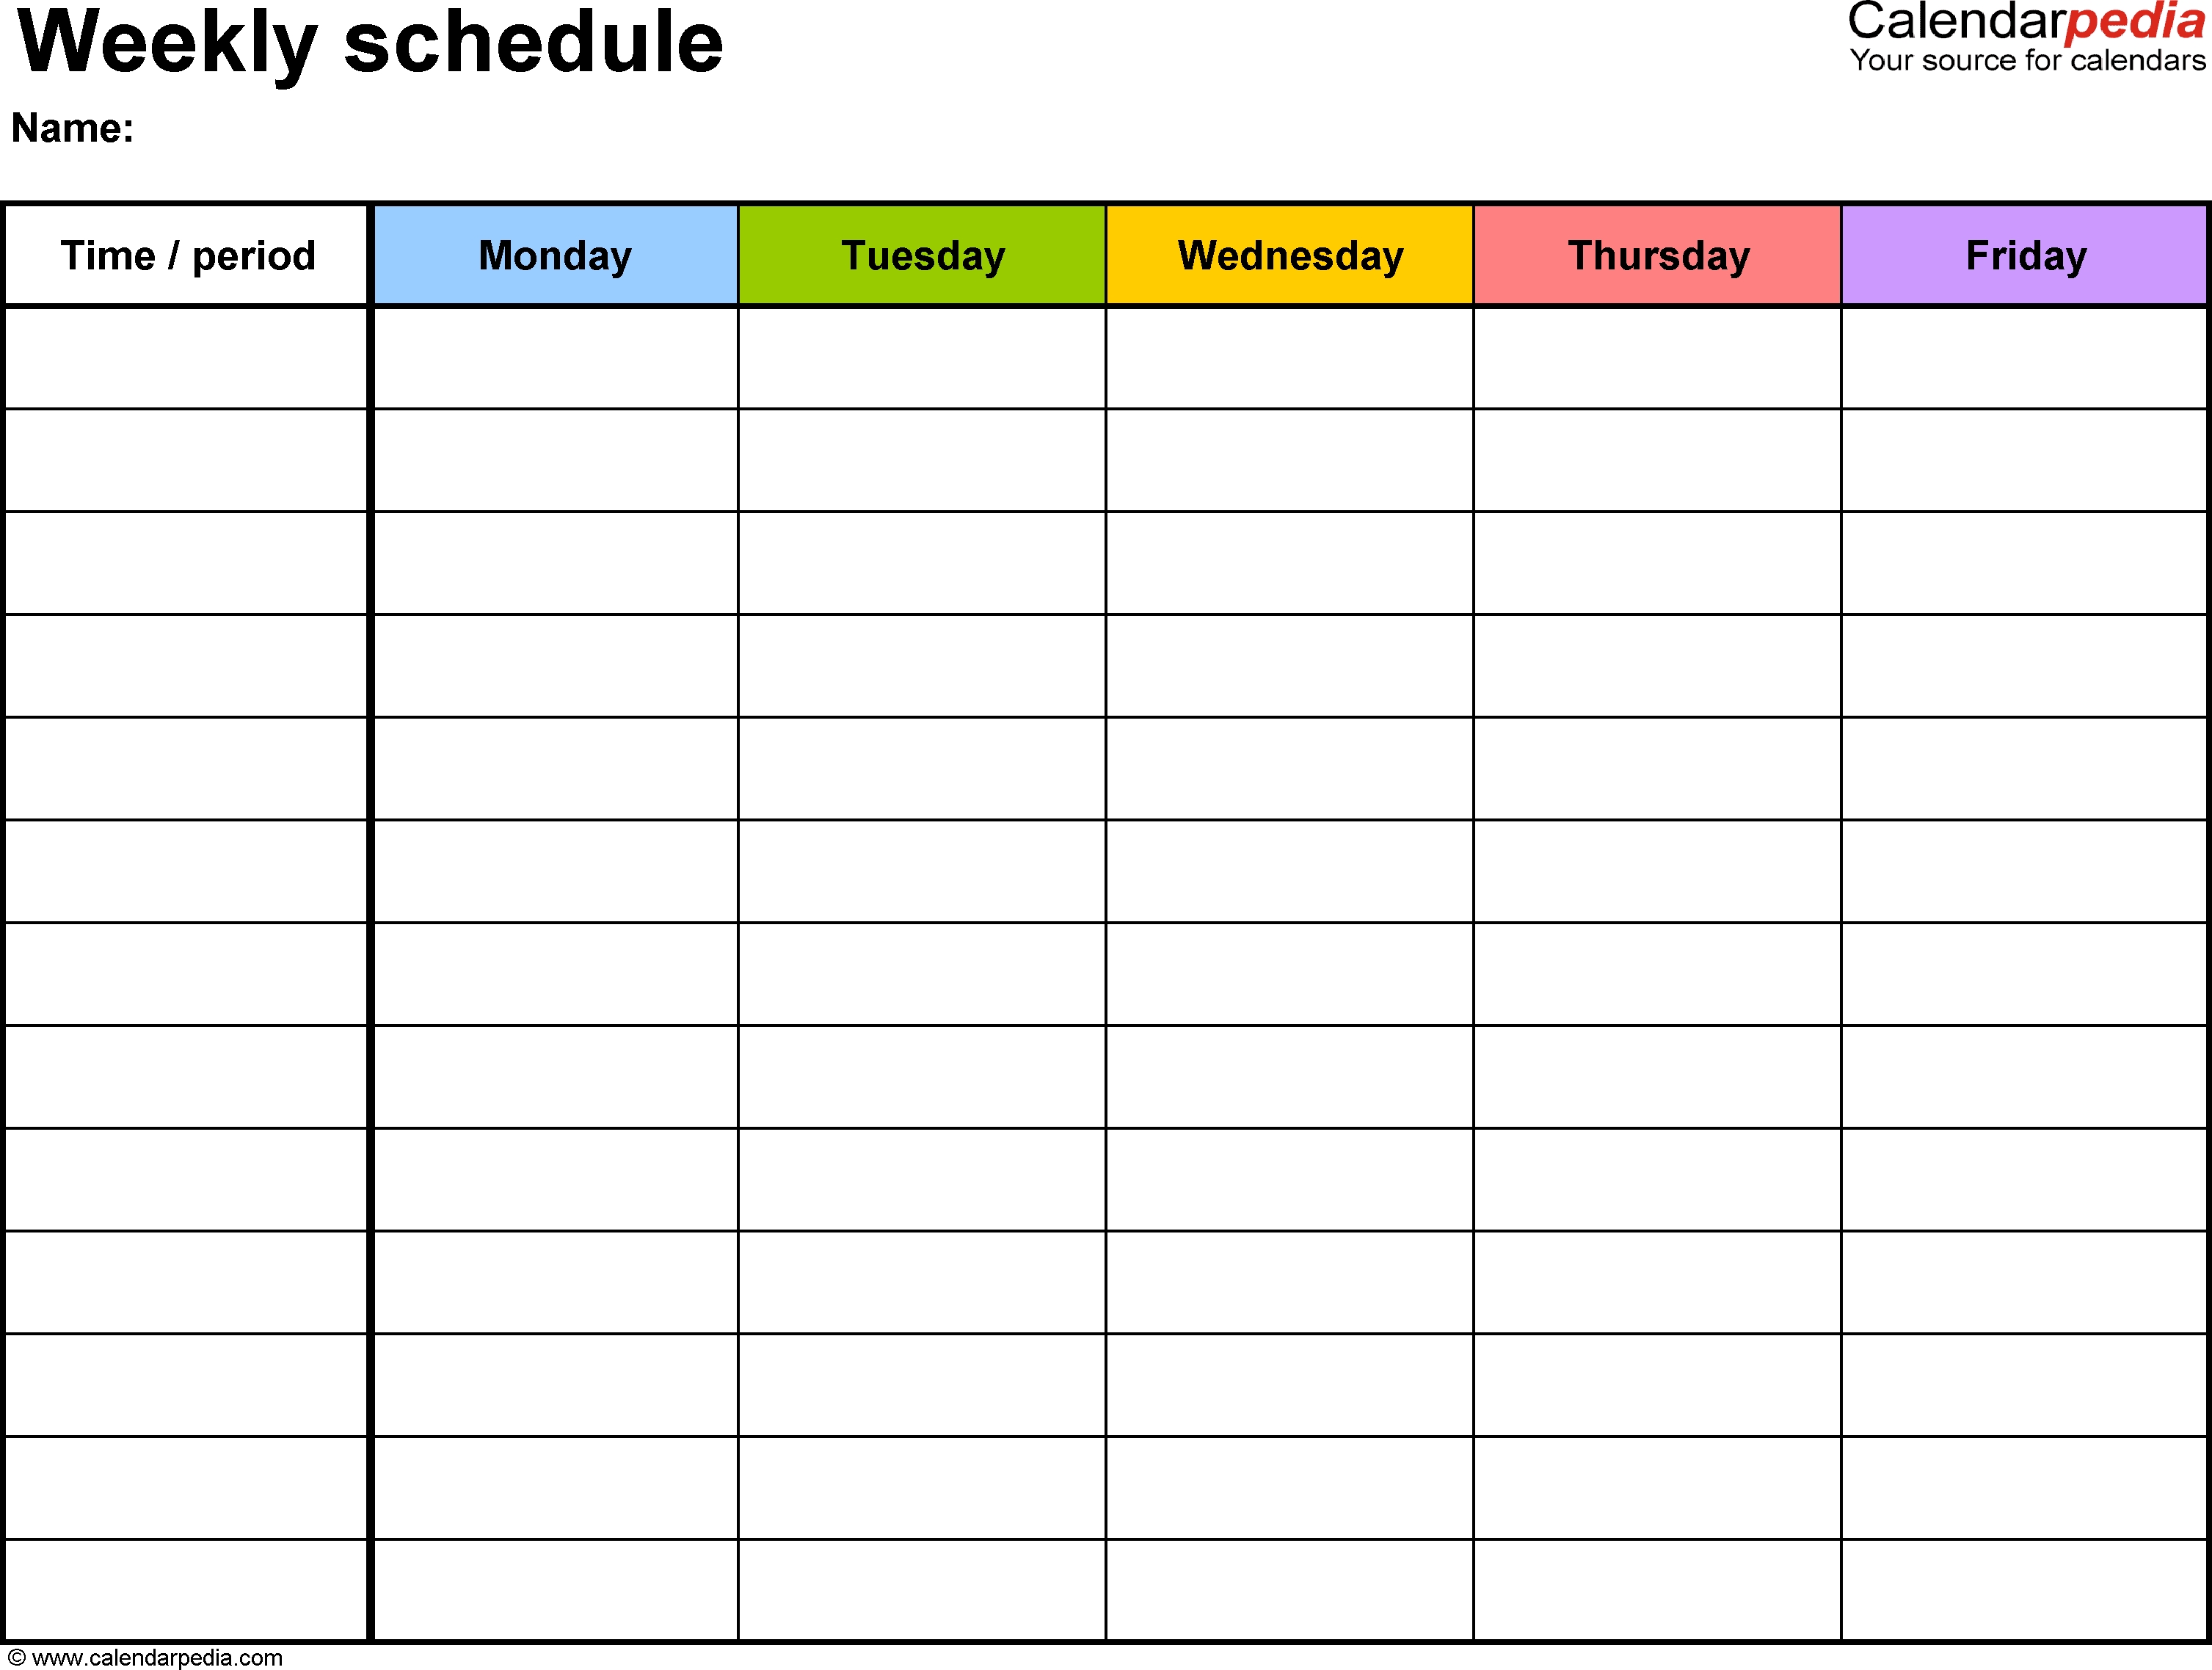 Free Weekly Schedule Templates For Pdf - 18 Templates in Single Week Planner Page Monday-Friday